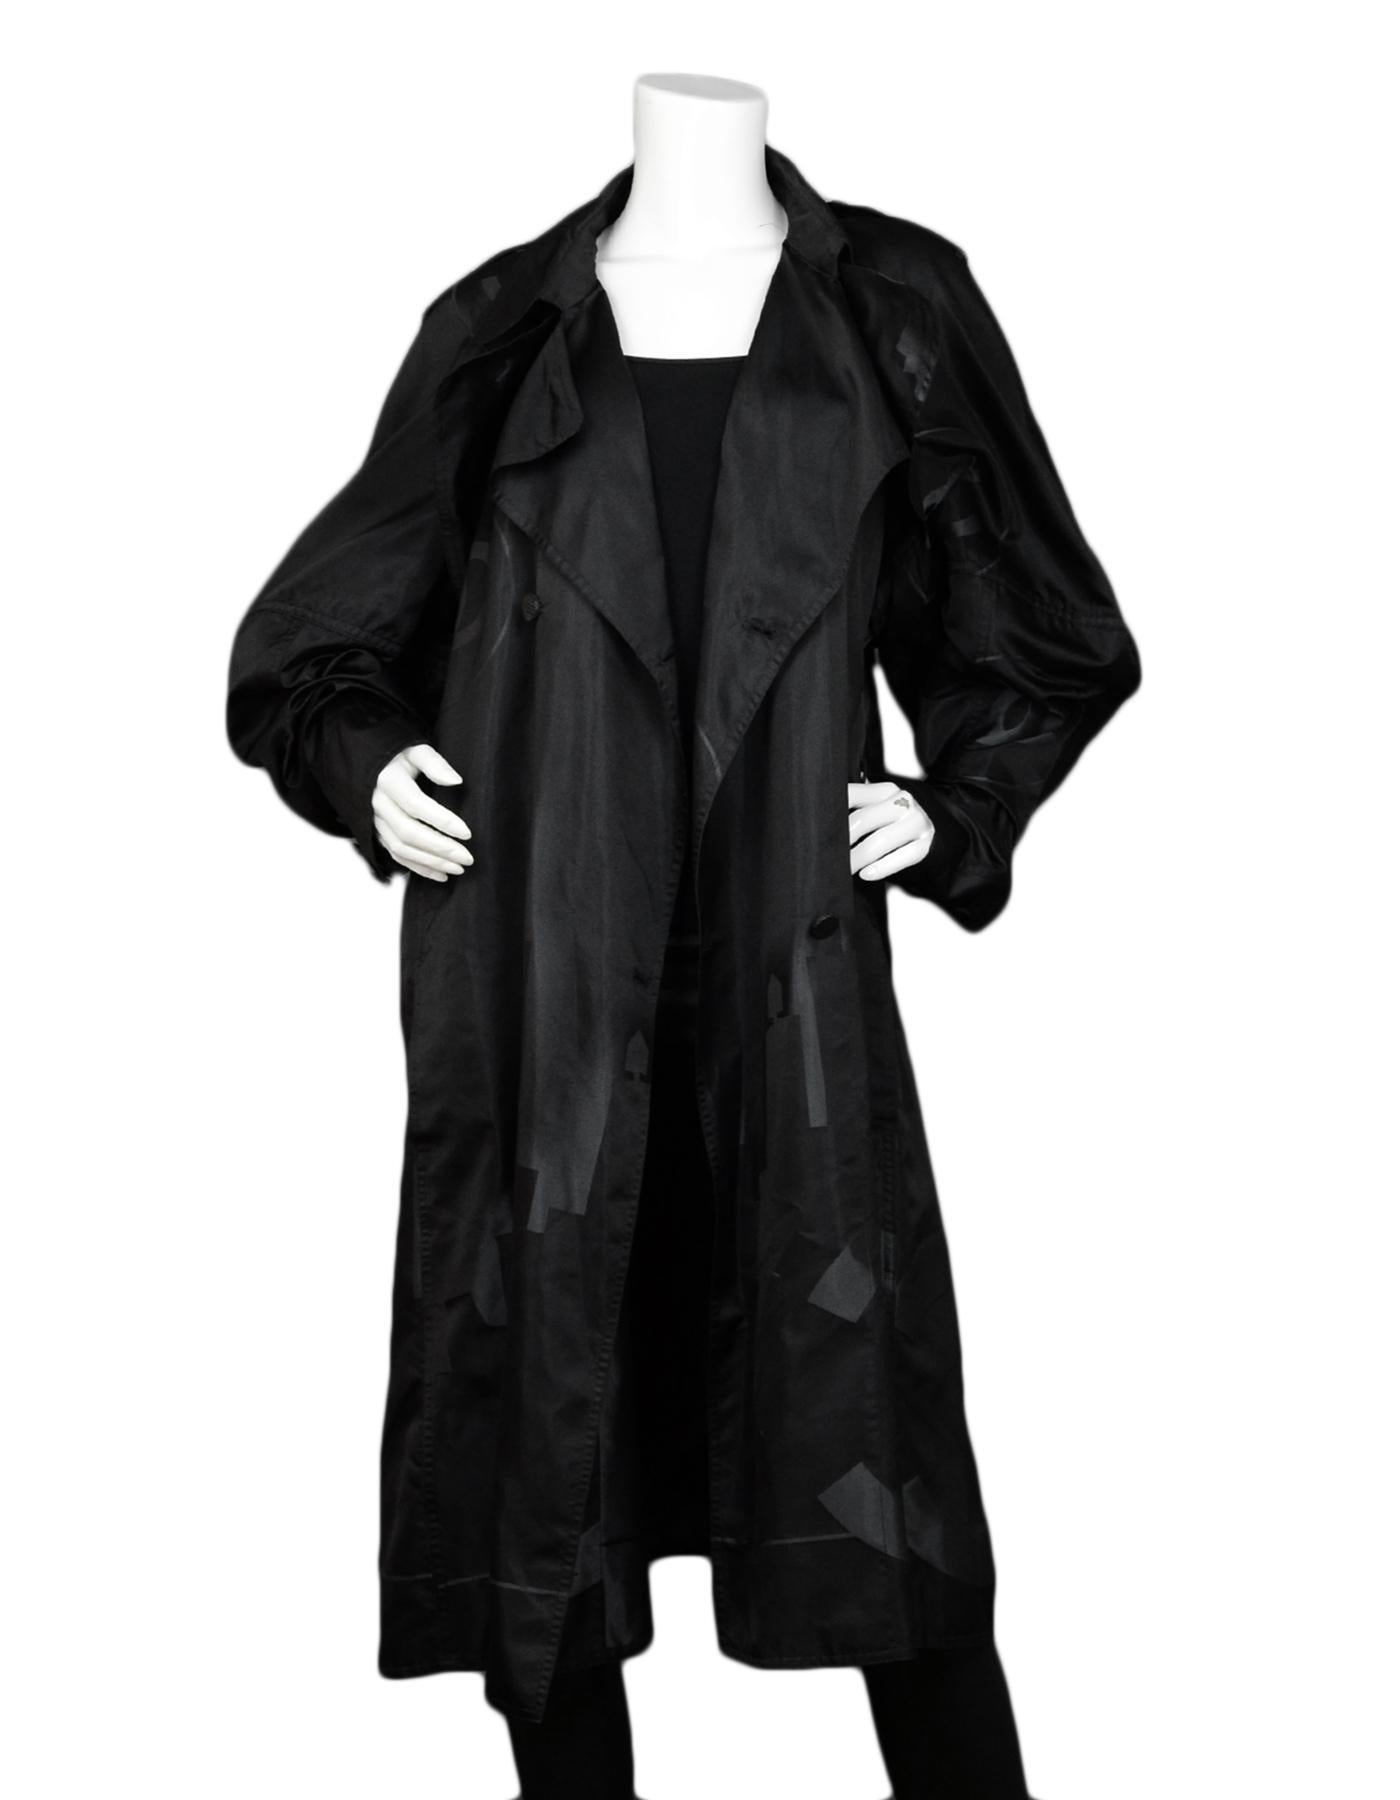 Chanel Black Silk Trench Coat w/ CC Cityscape Design sz 46

Made In: France
Color: Black, grey
Materials: 100% silk
Opening/Closure: Double-breasted button closure
Overall Condition: Very good pre-owned condition, with missing belt
Tag Size: FR46 /